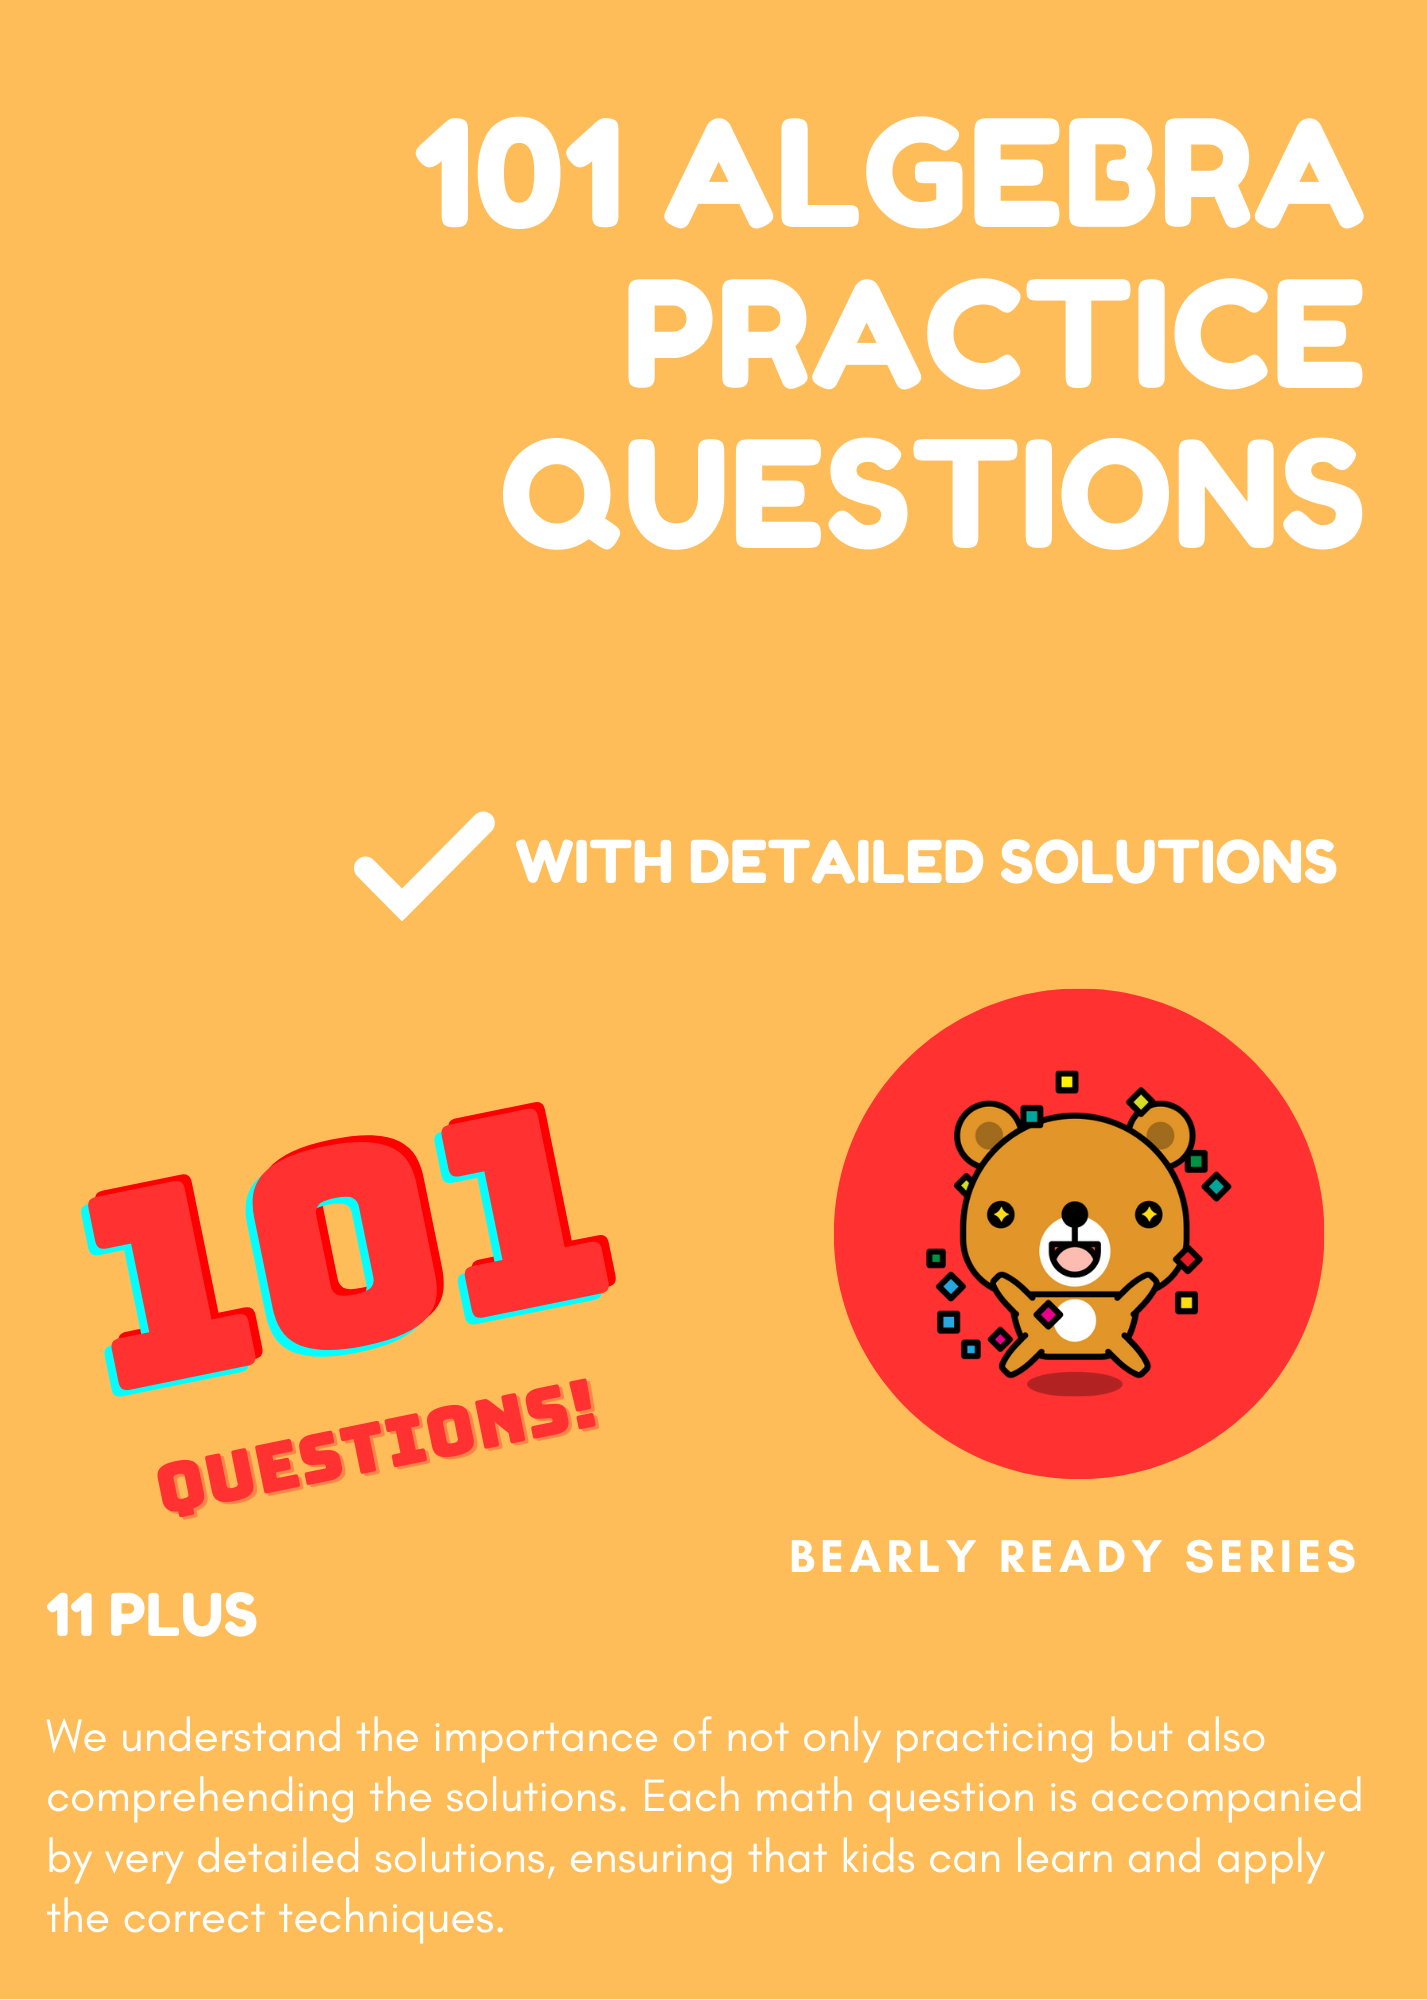 101 Algebra questions with solutions for 11 plus exams. Ages 9, 10, 11